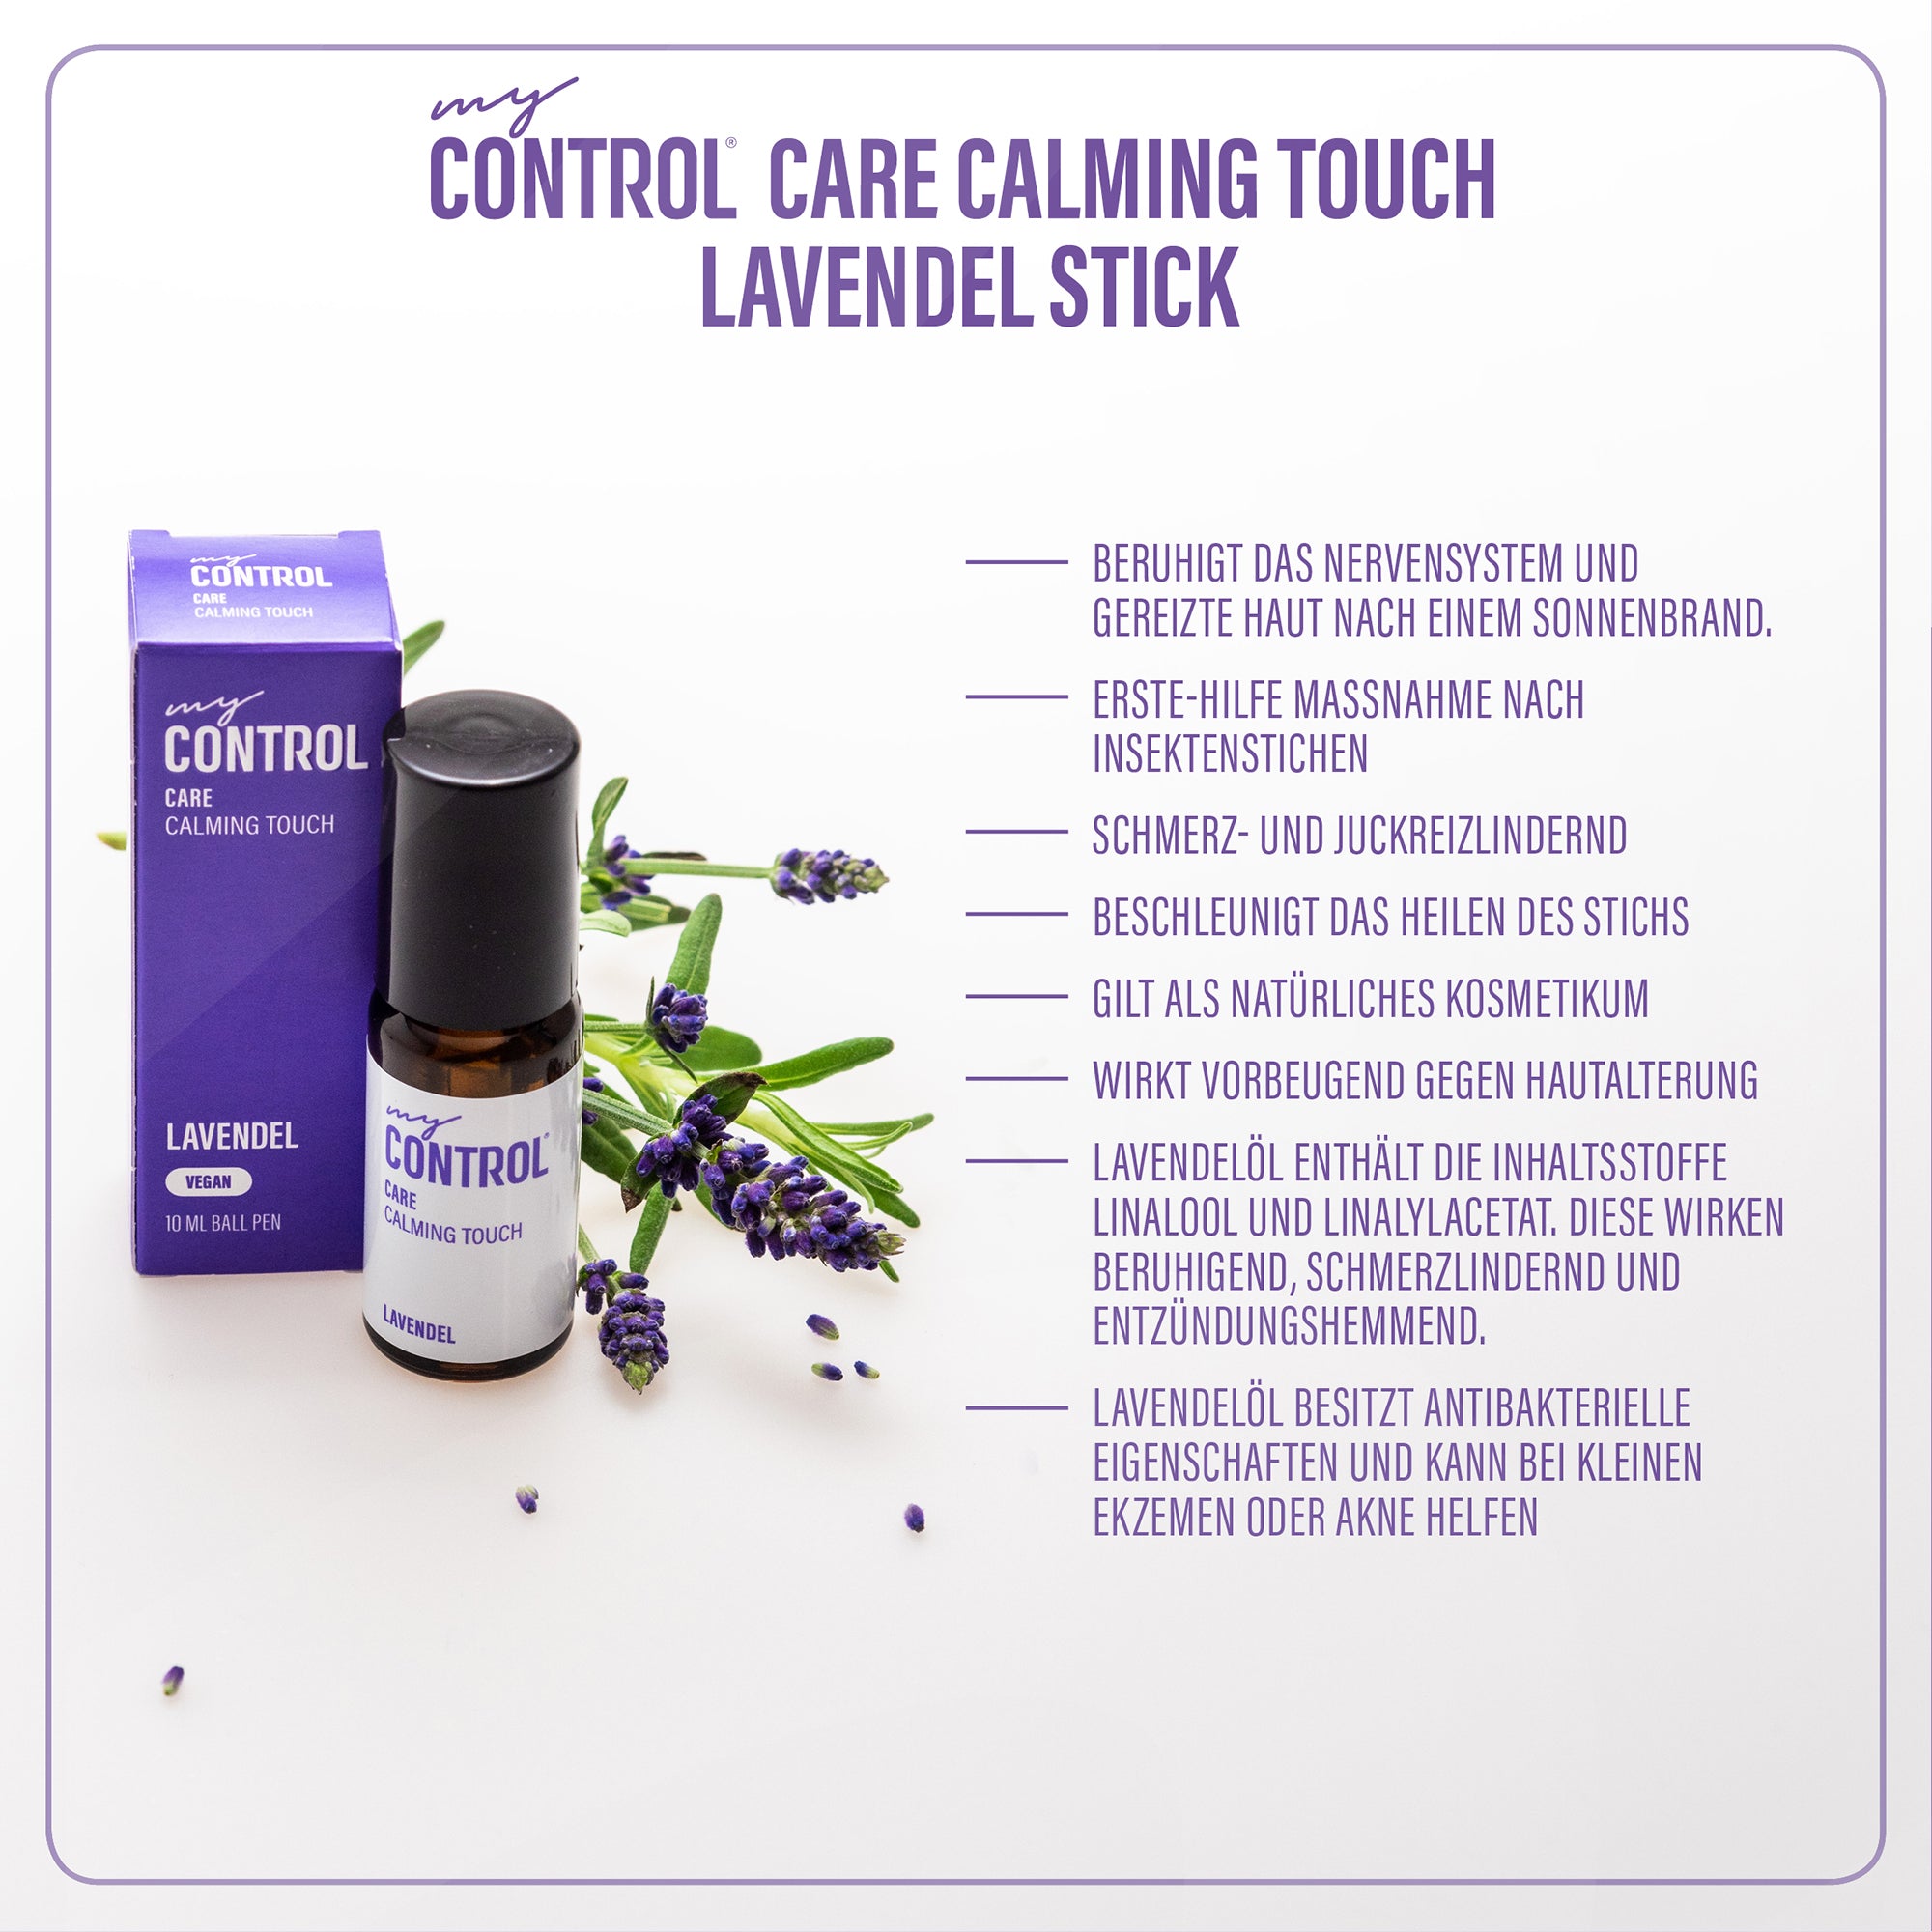 Calming Touch Lavendel